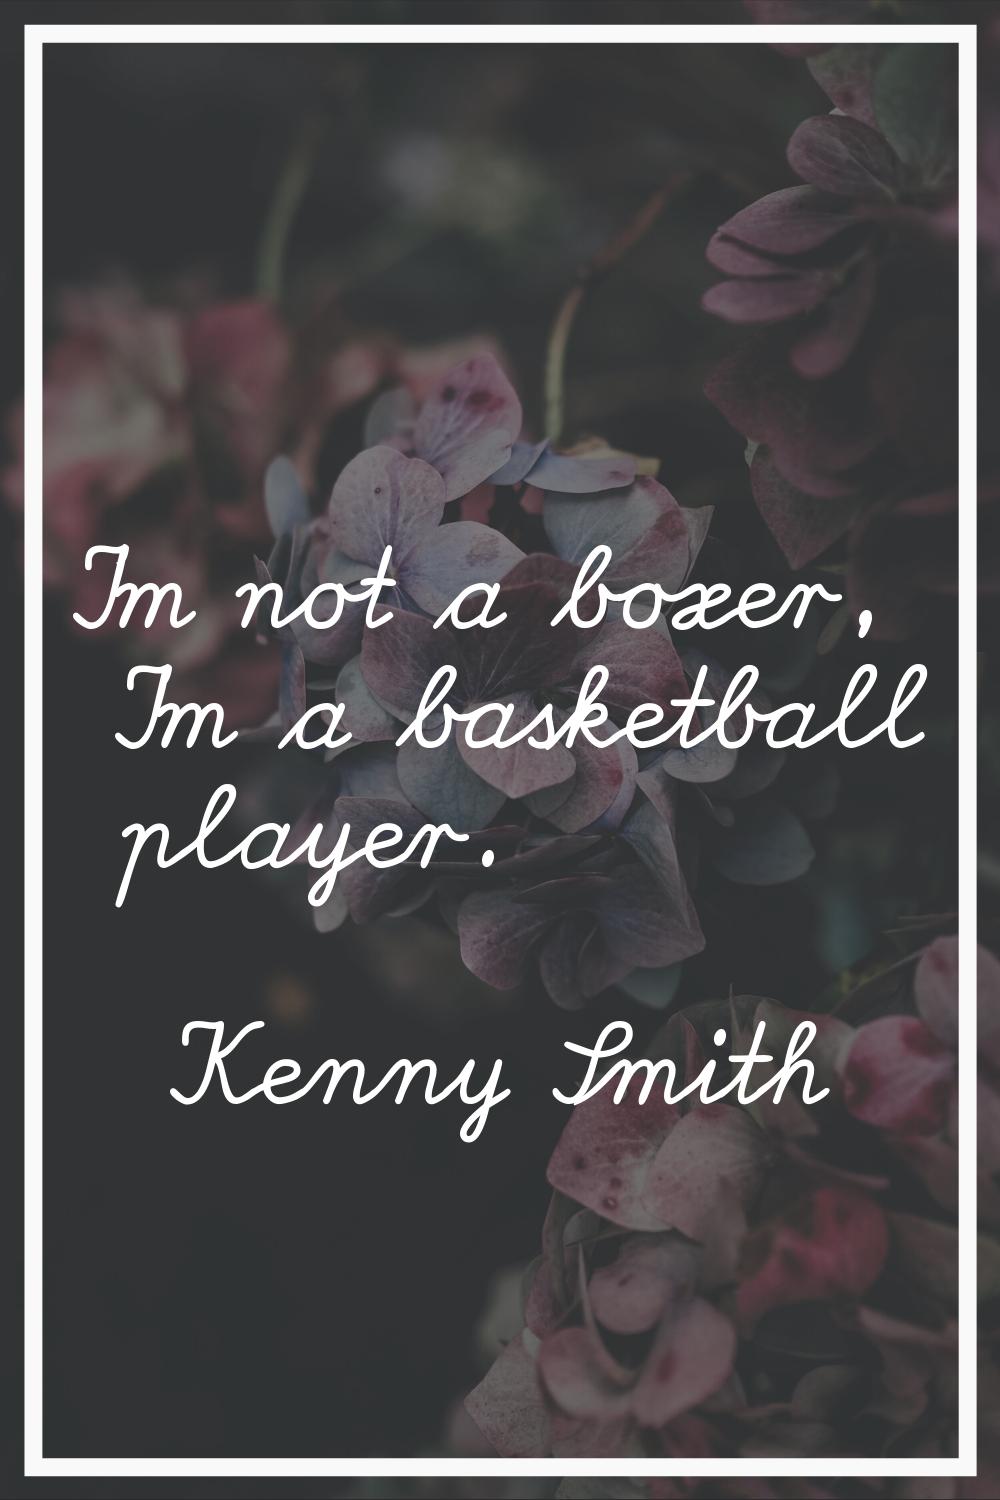 I'm not a boxer, I'm a basketball player.